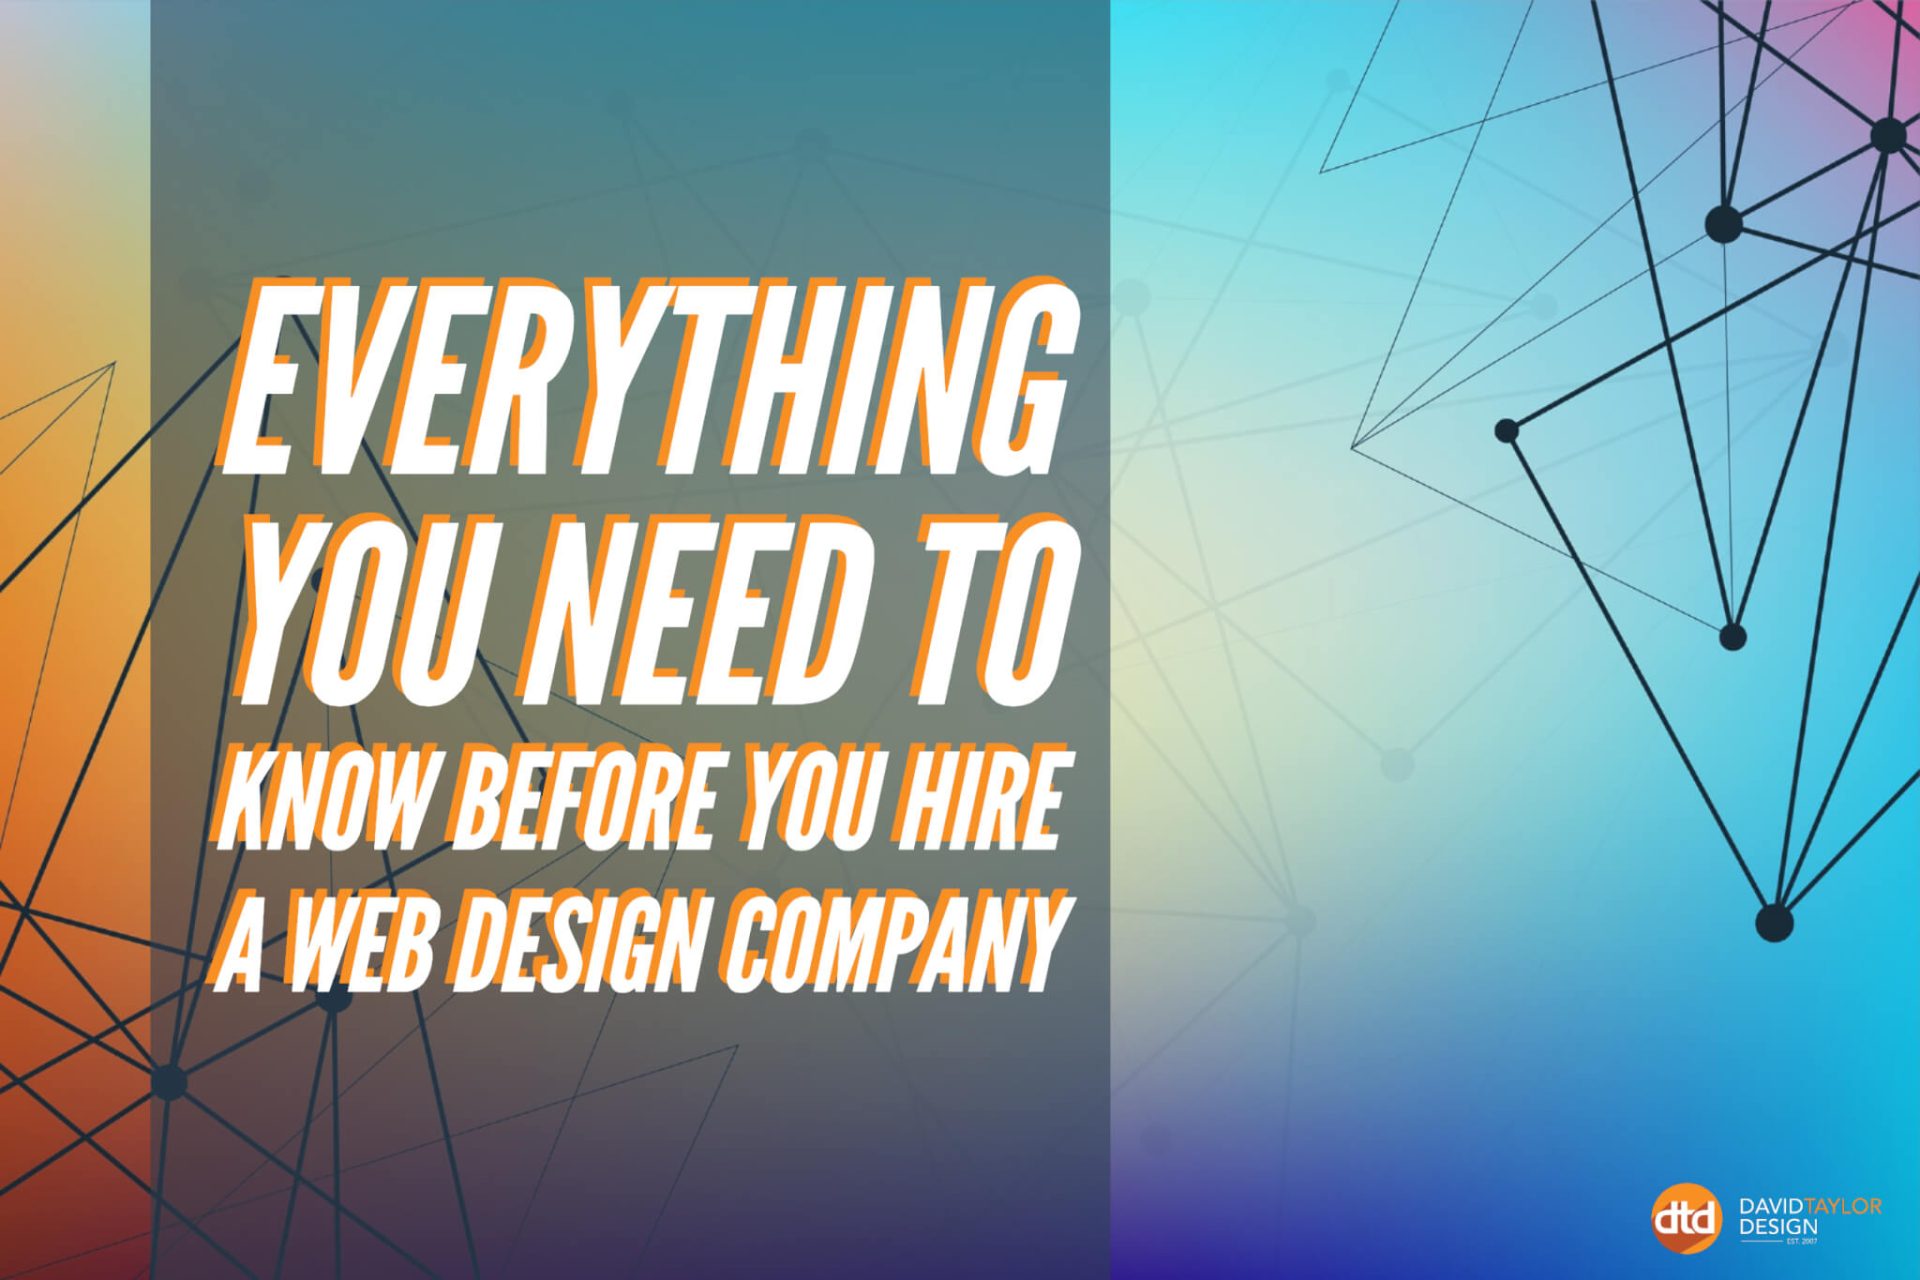 Everything You Need to Know Before You Hire a Web Design Company